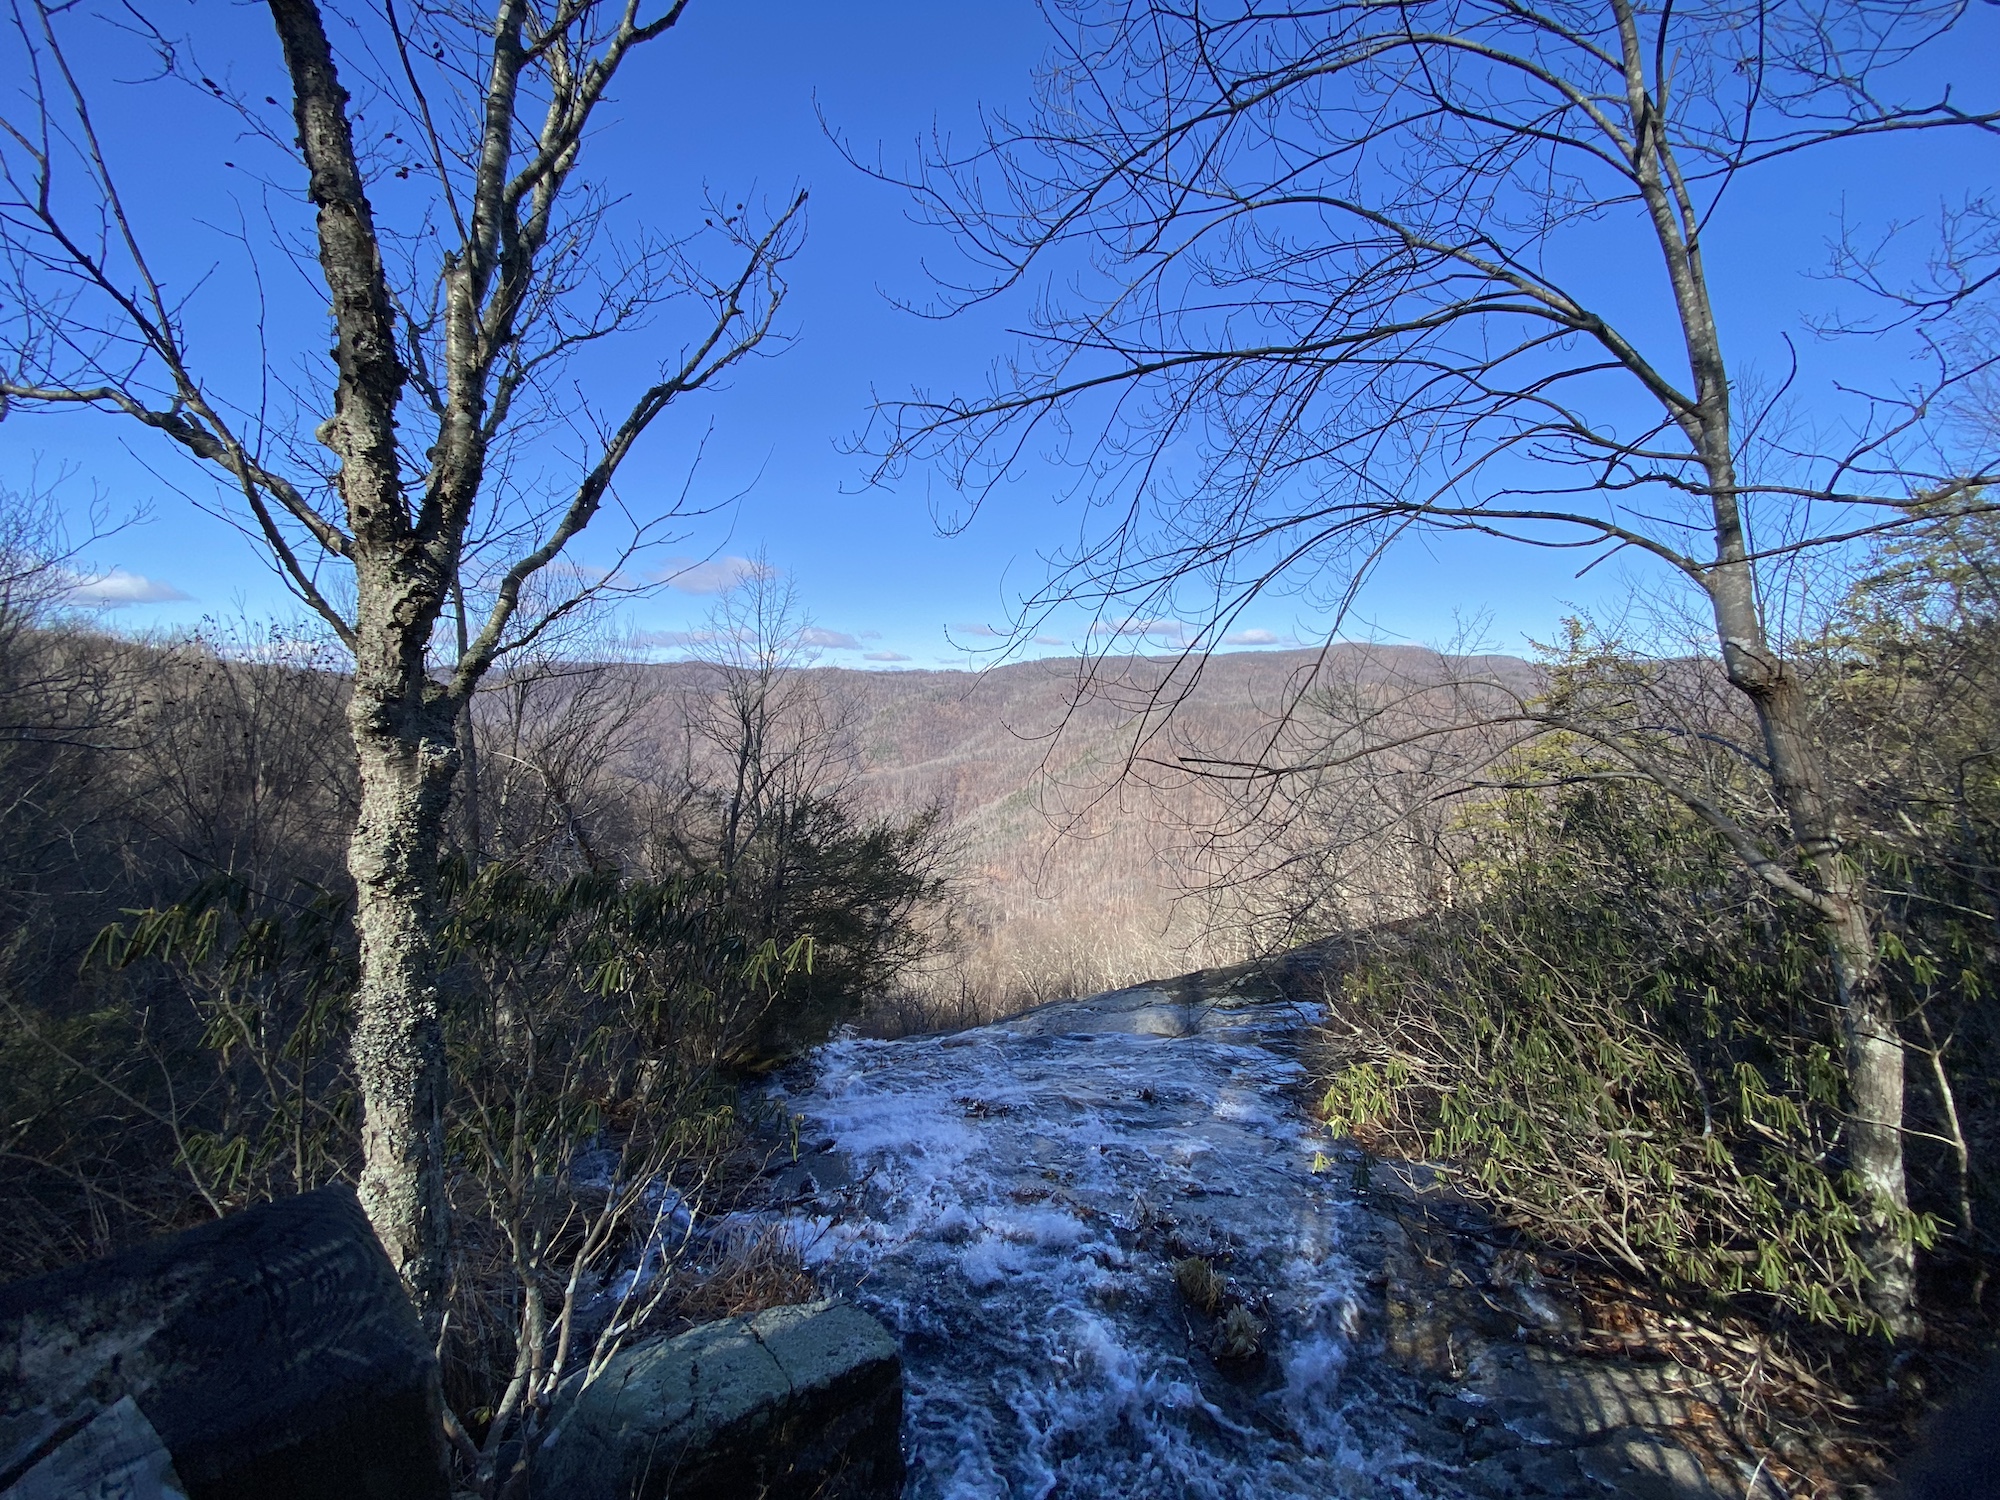 Crabtree Falls Trail: A Scenic Hike in Nelson County